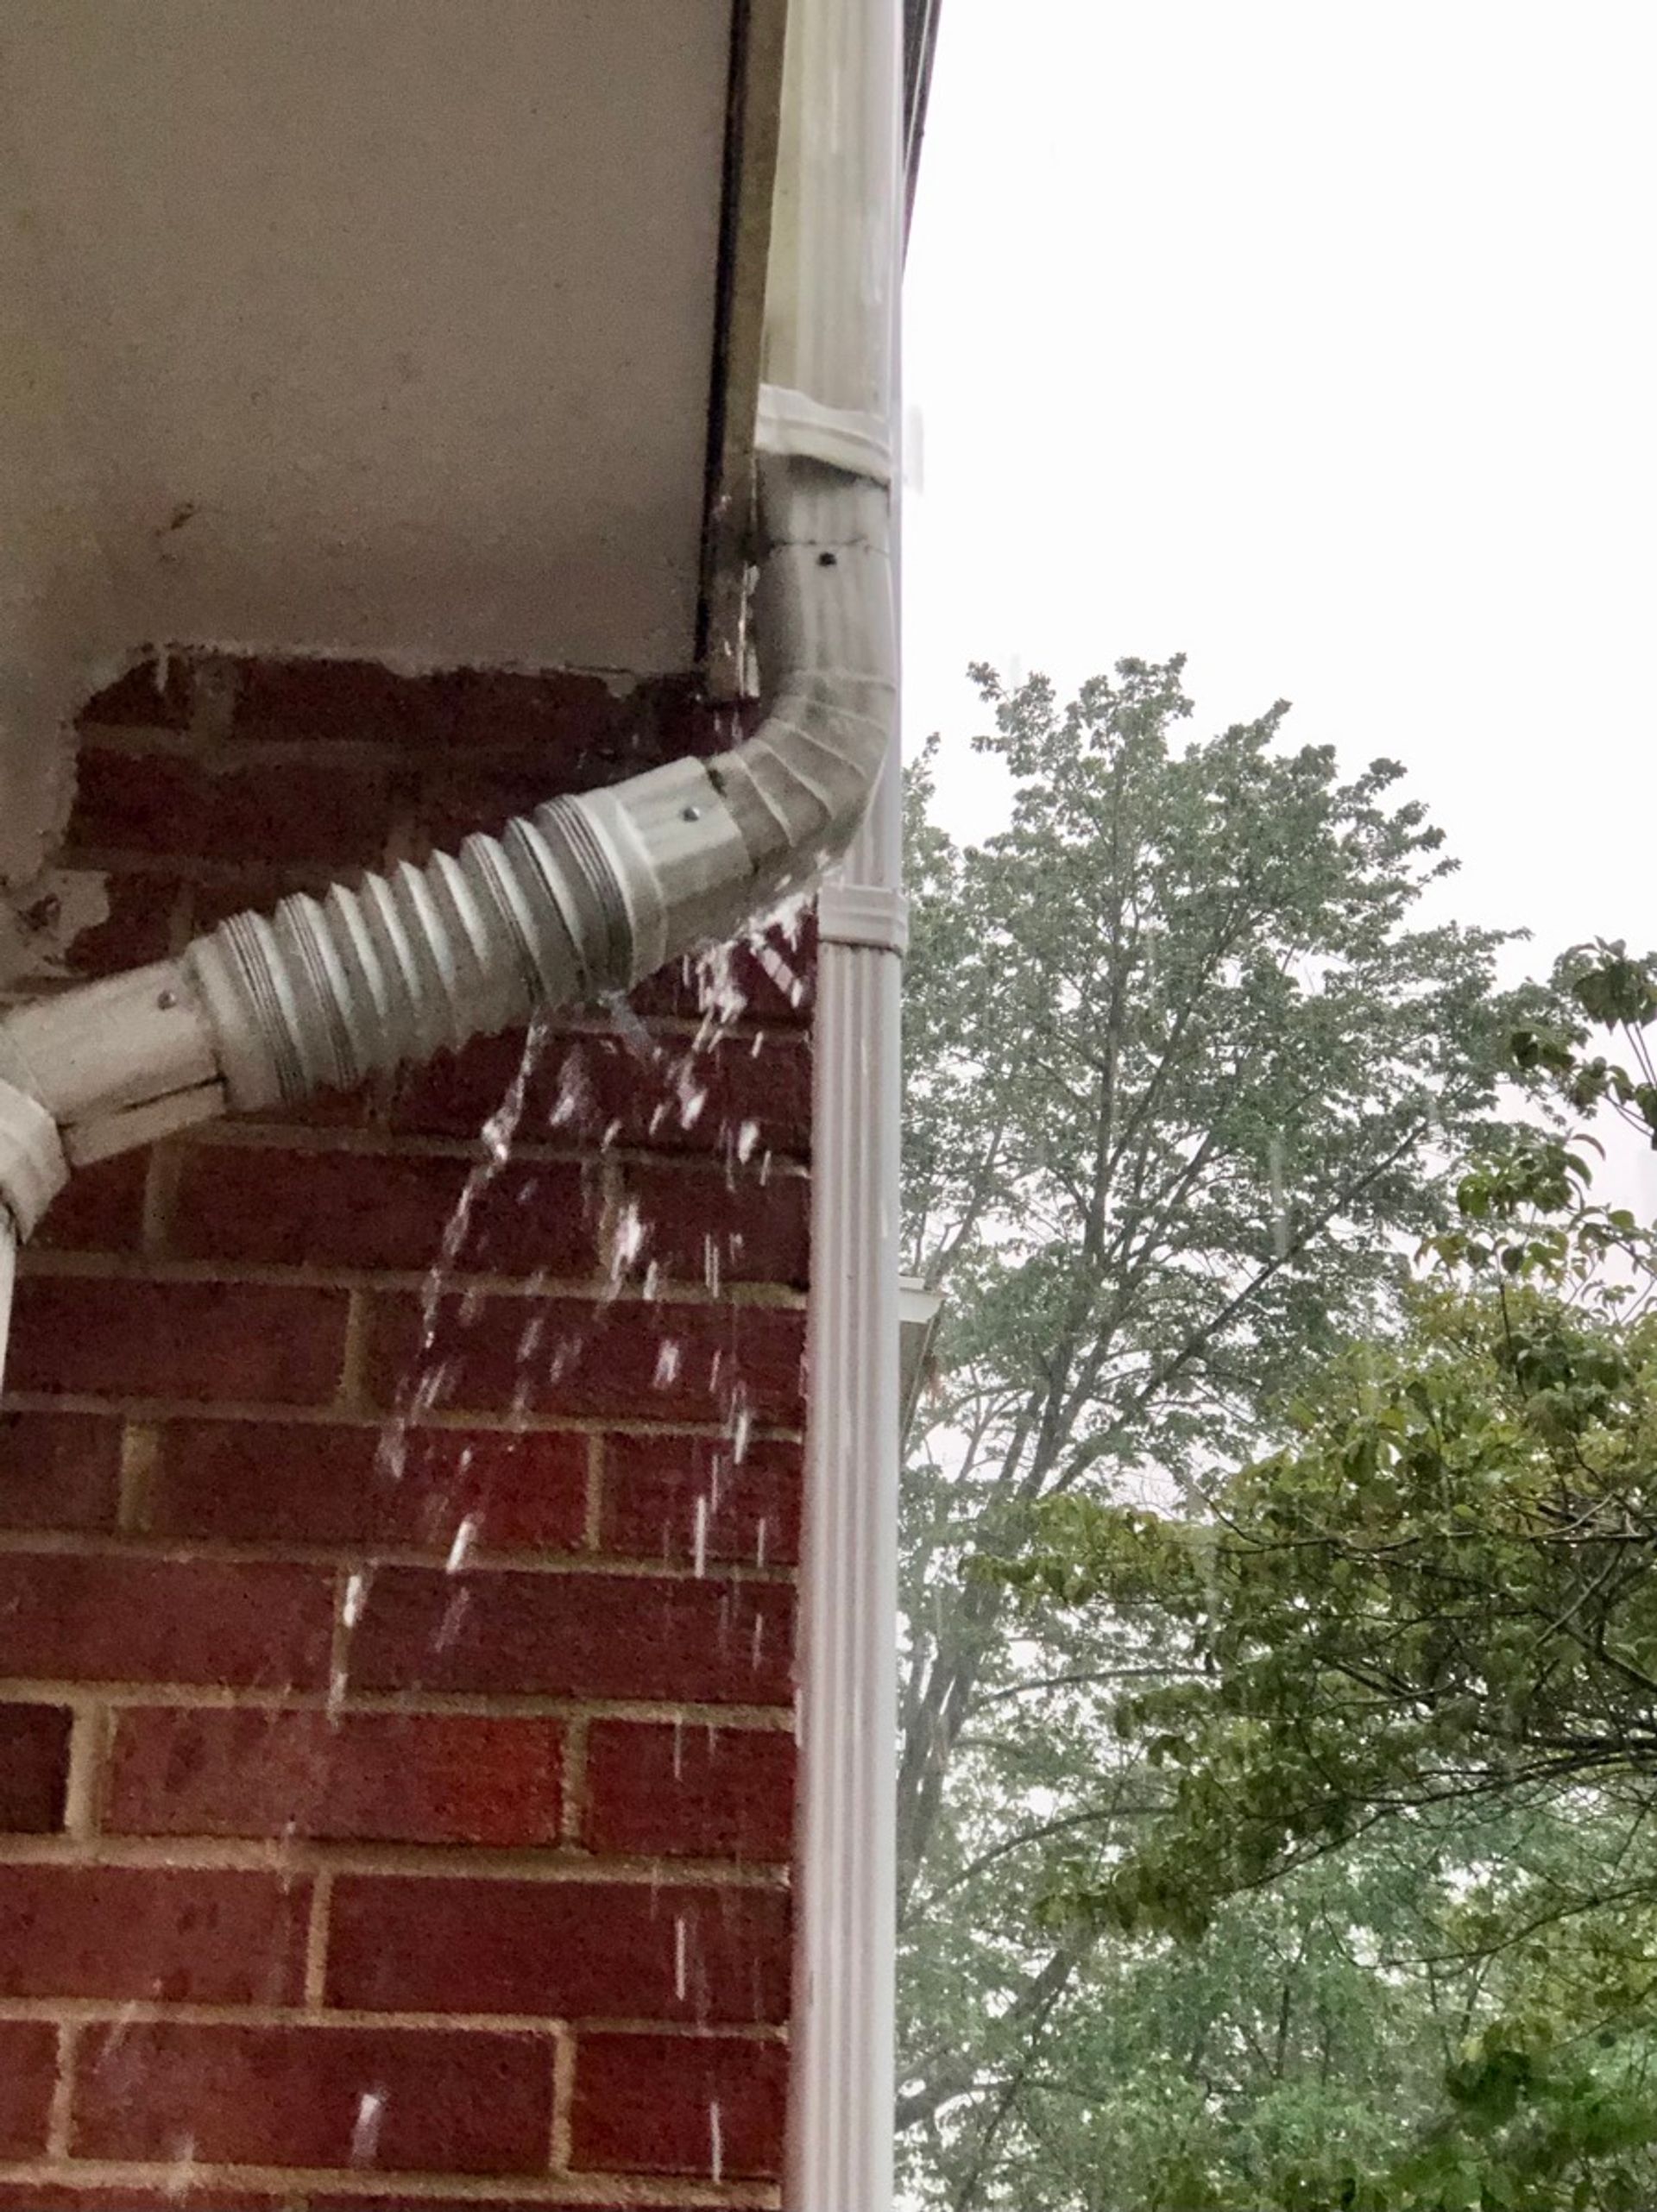 Rain Overflowing Gutters And Downspout 2023 11 27 05 29 48 Utc